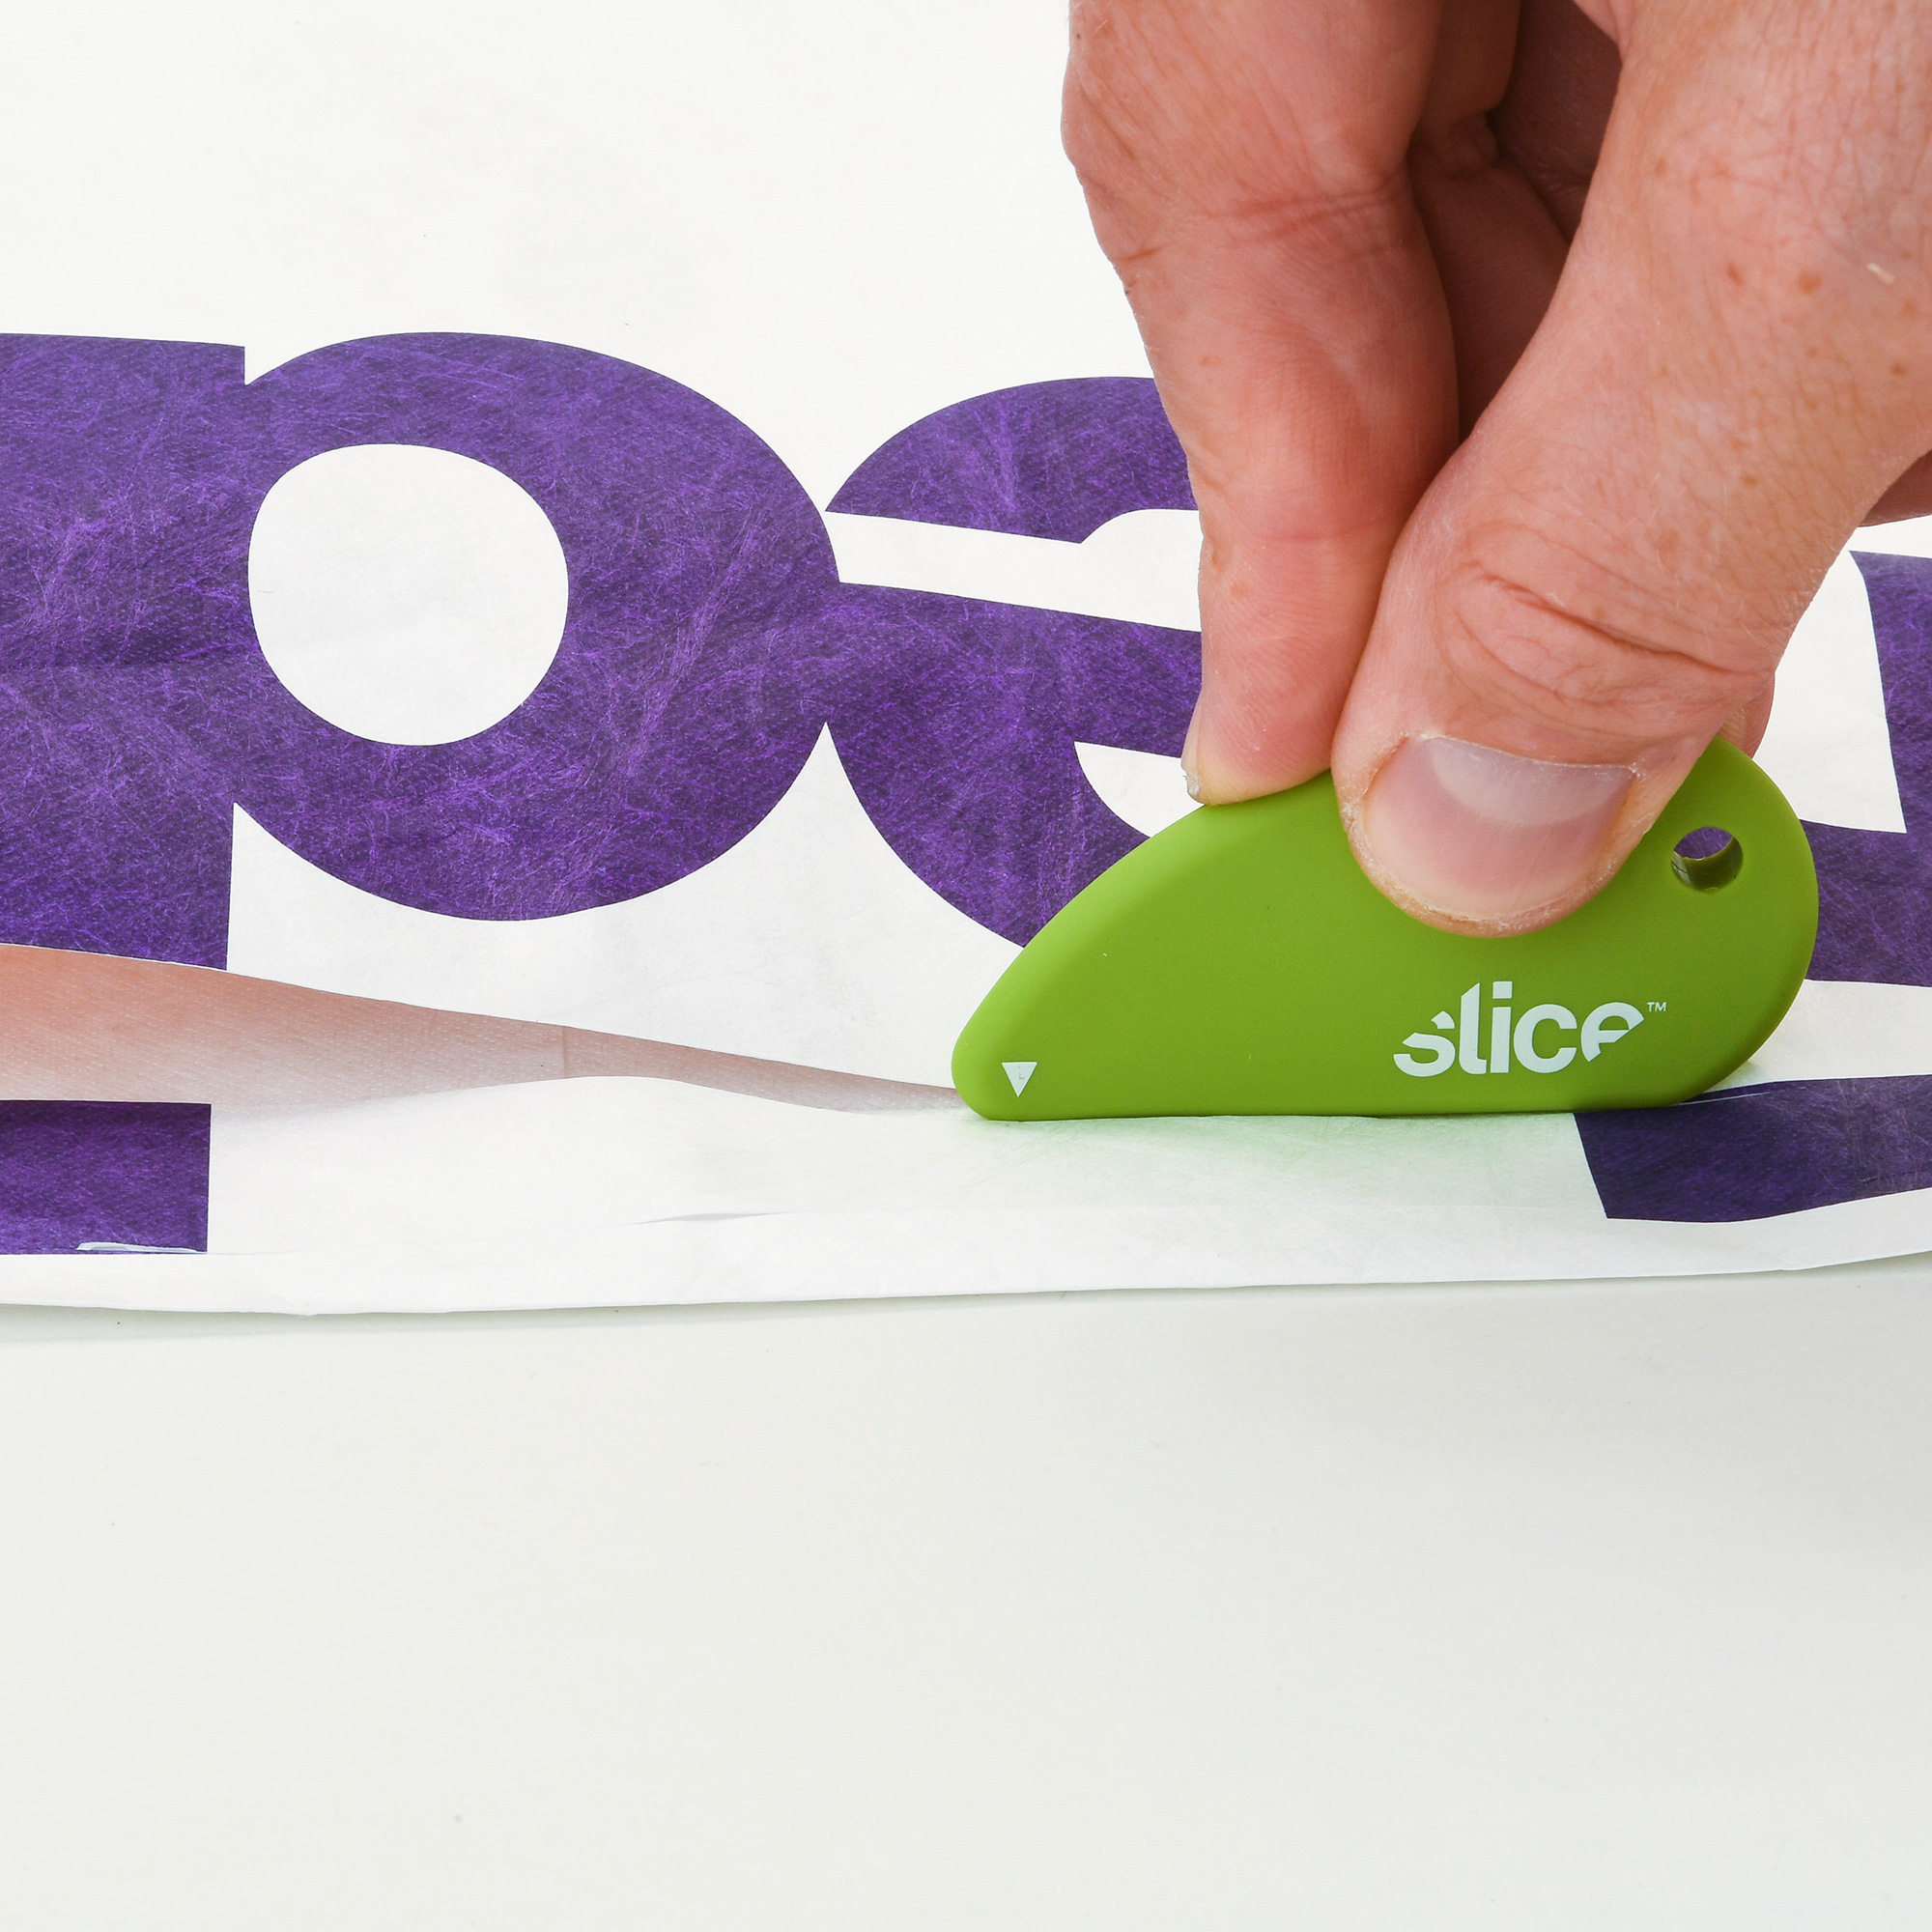 Slice Ceramic Safety Cutter, 2.25" x 1.25" - image 3 of 5